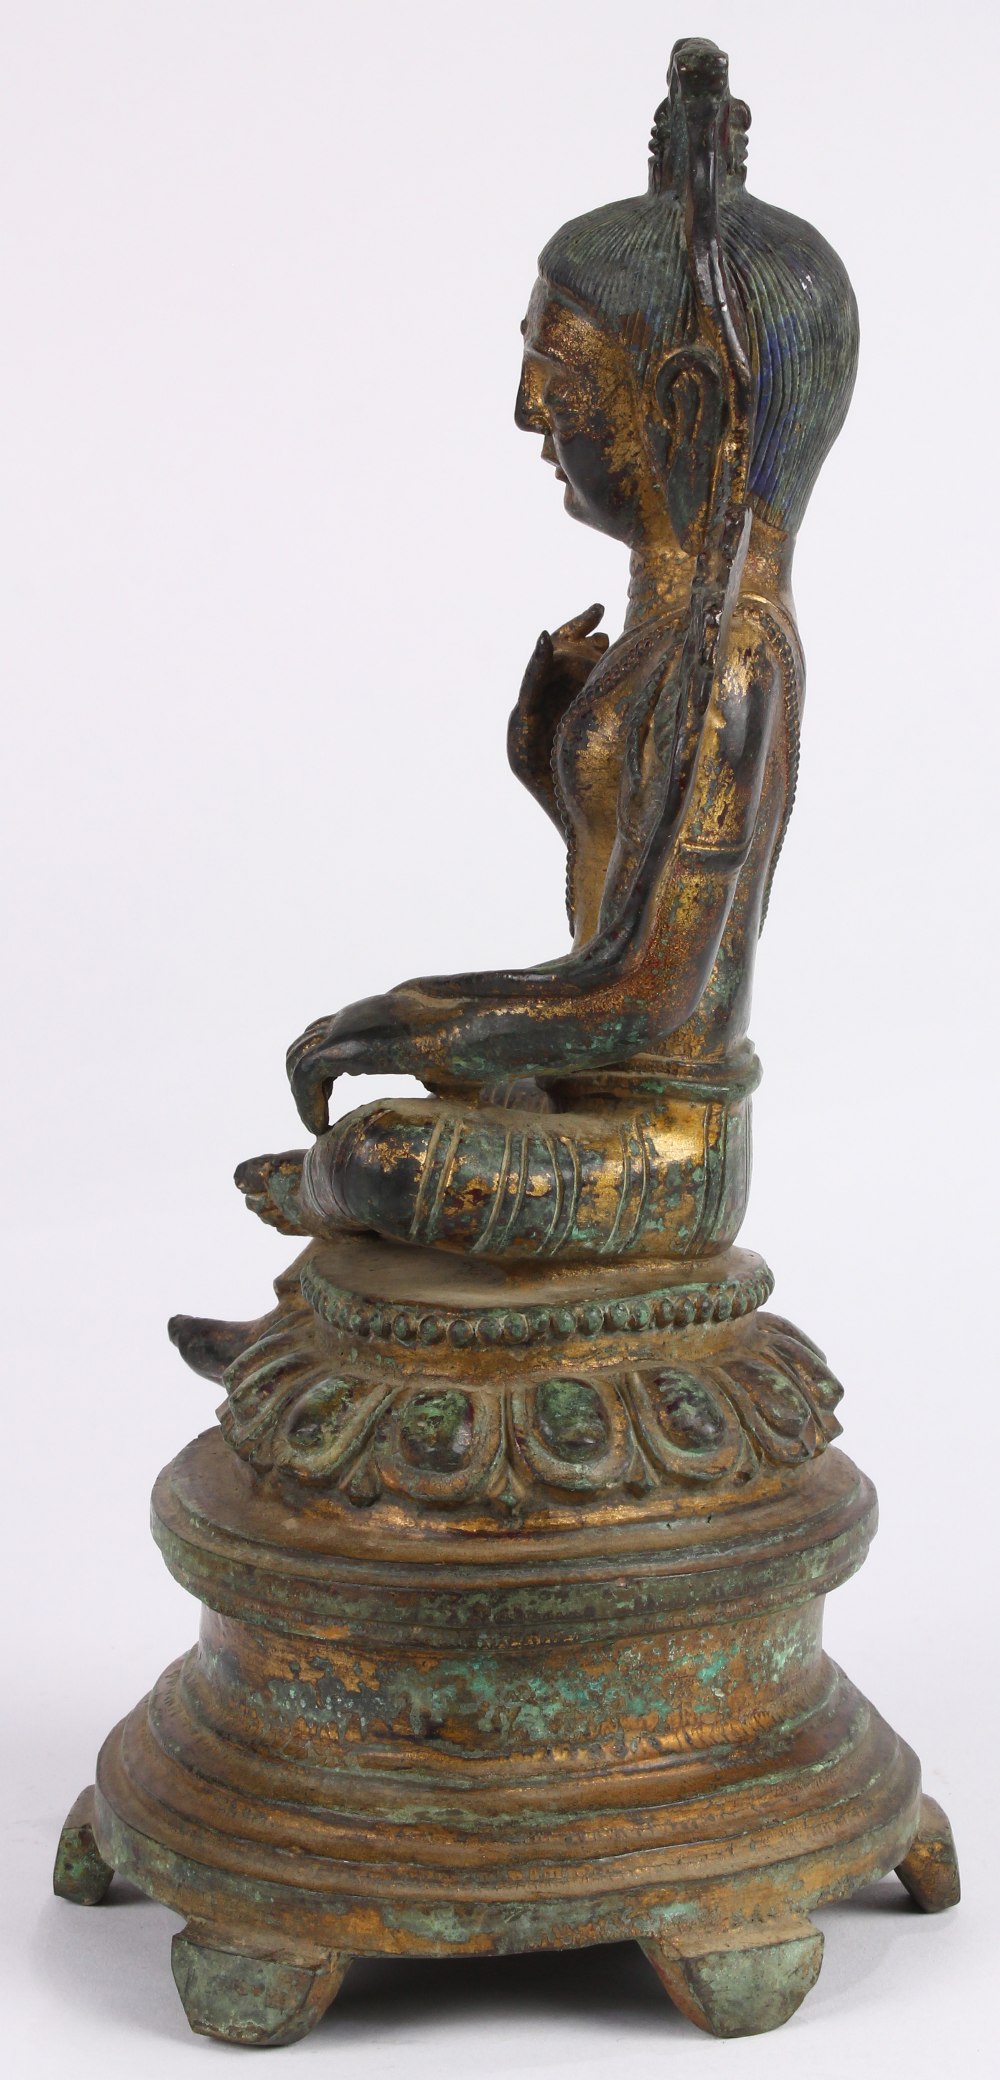 Chinese gilt bronze bodhisattva, seated in royal ease on a lotus pedestal, holding two lotus sprigs, - Image 2 of 4